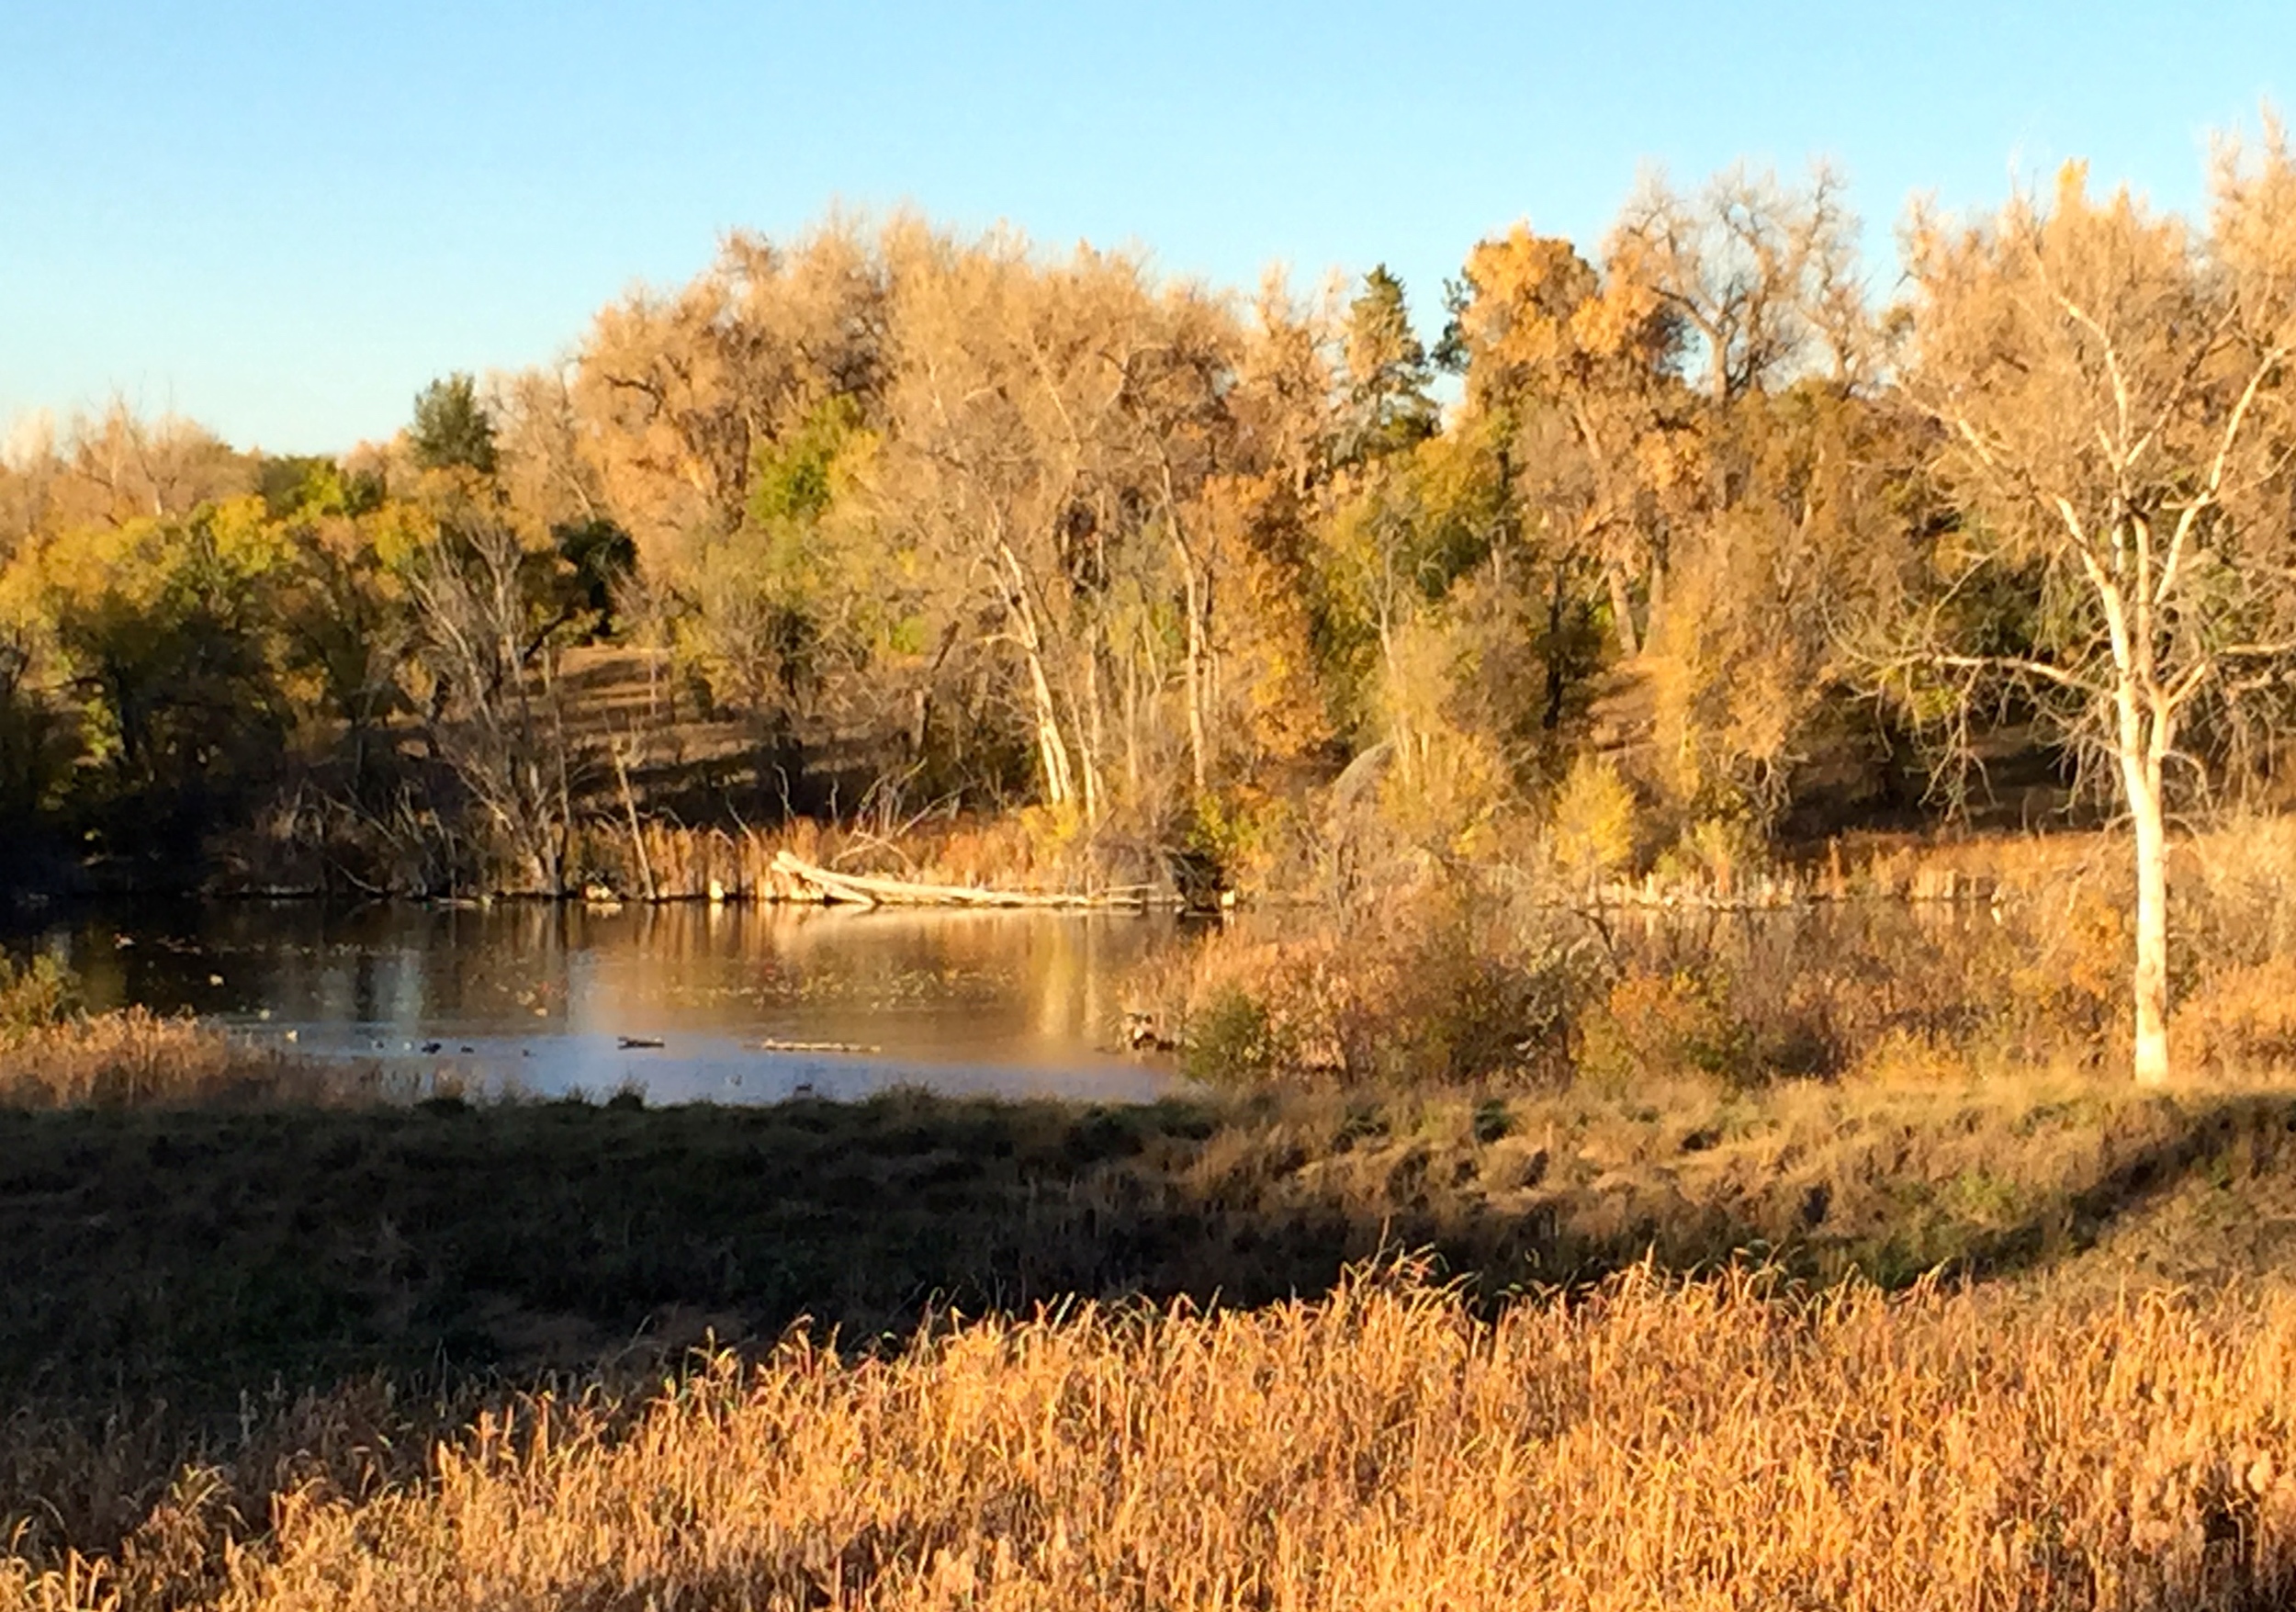 Autumn scene at the Marjorie Perry Nature Preserve in Greenwood Village.